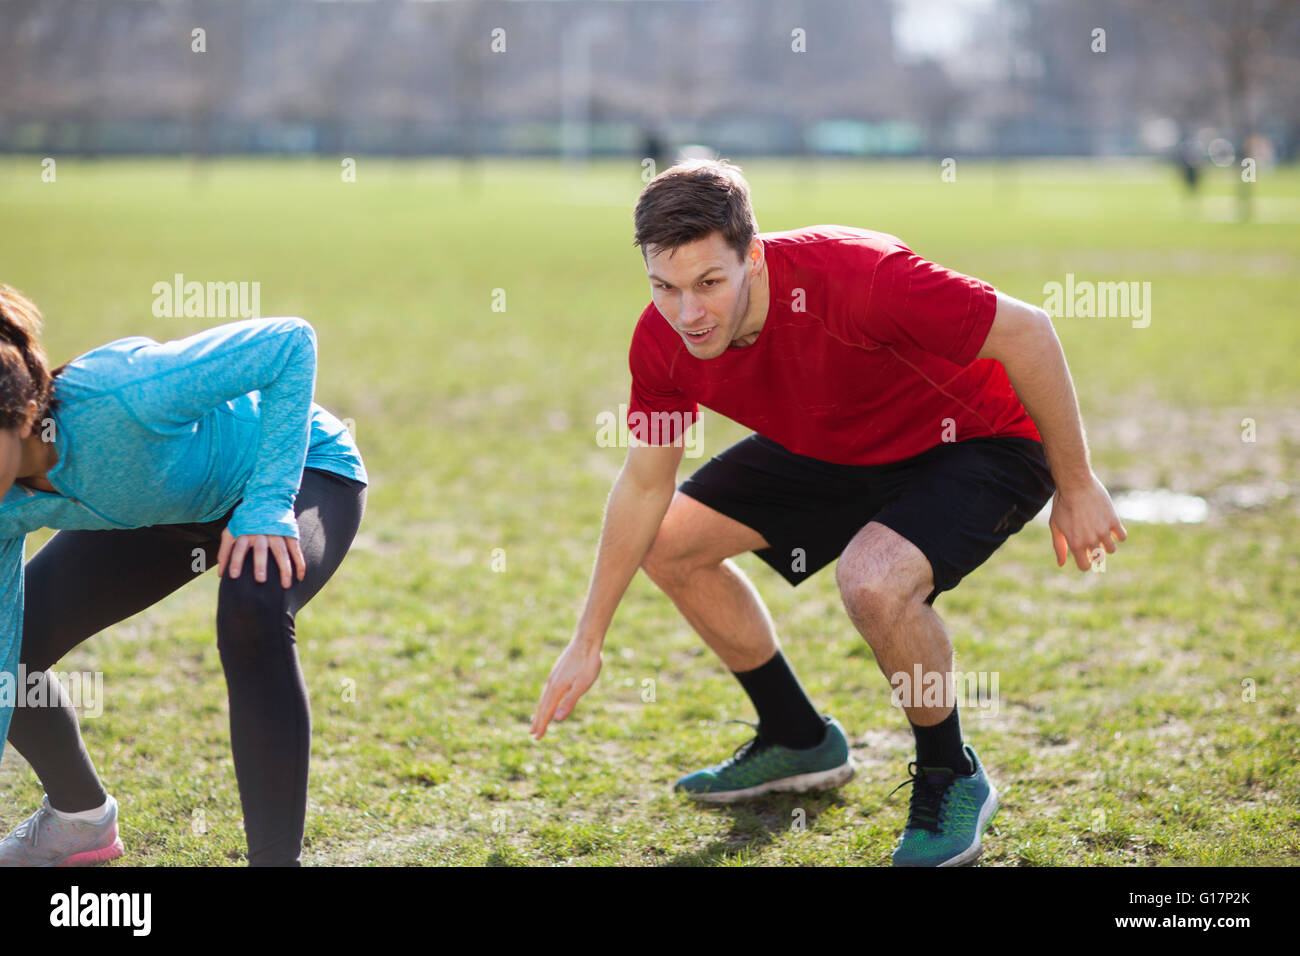 Young man and woman doing physical training on playing field Stock Photo